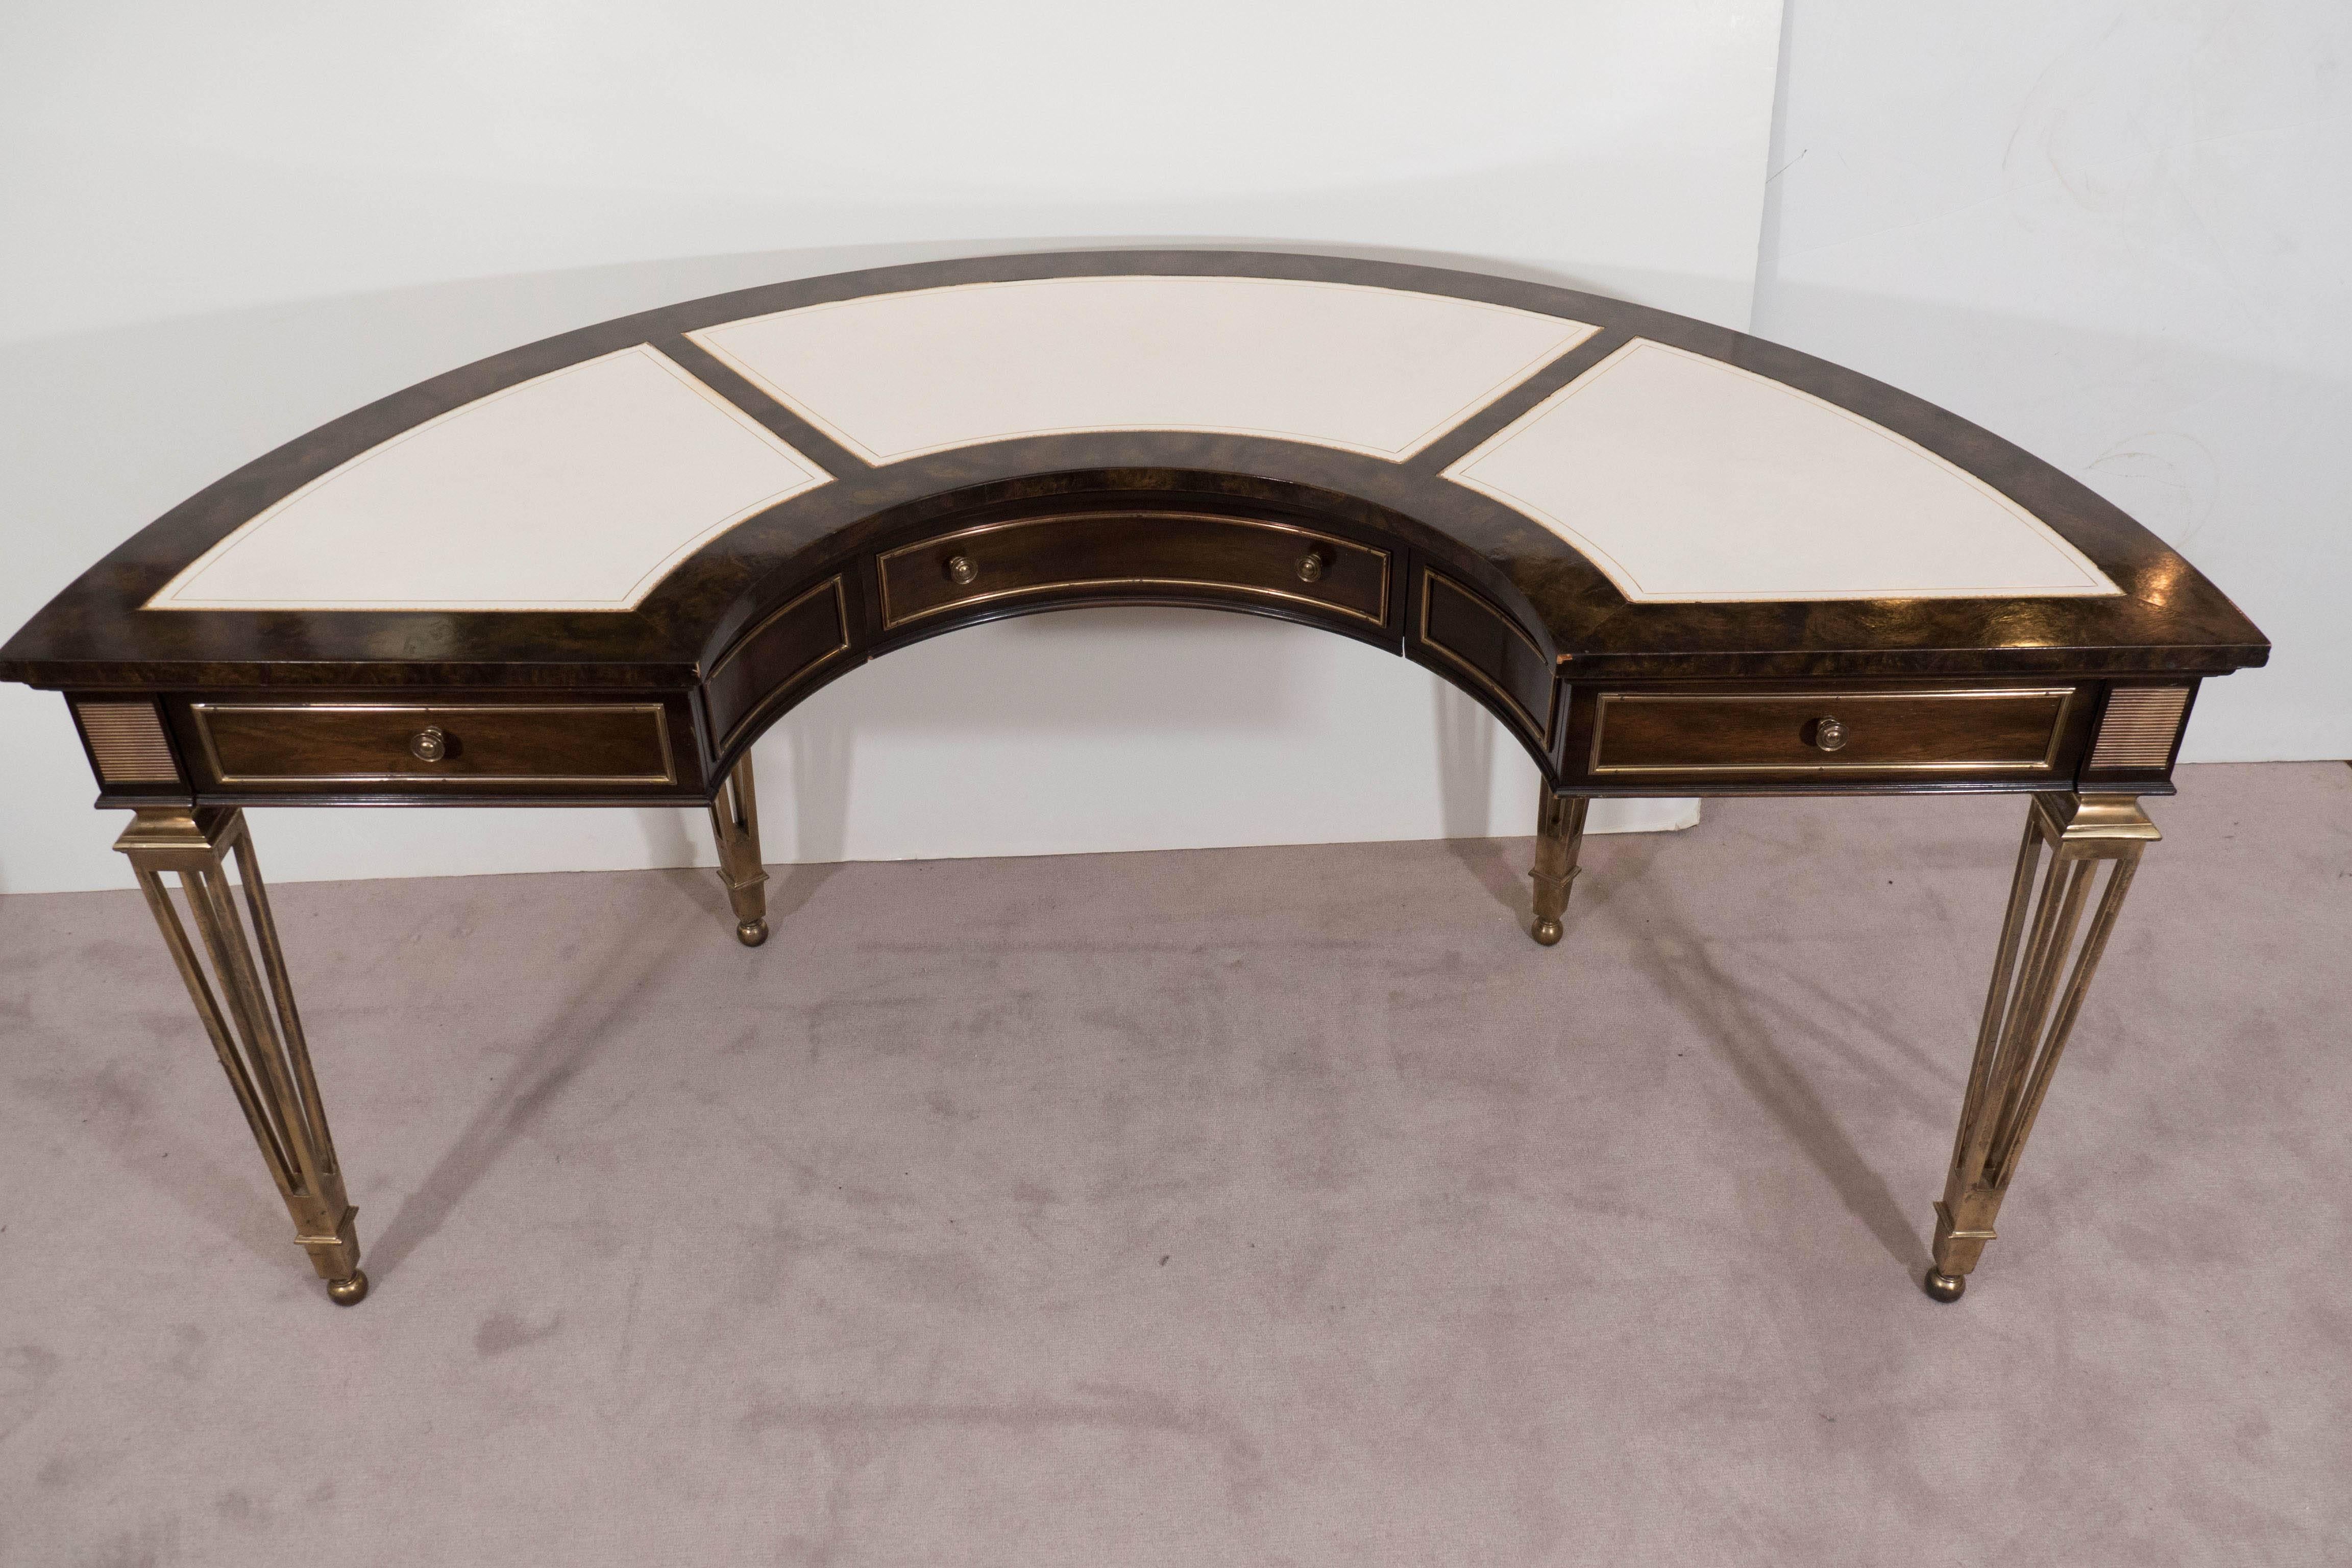 Neoclassical Mastercraft Burl Wood and Brass Demilune Desk with White Leather Tops